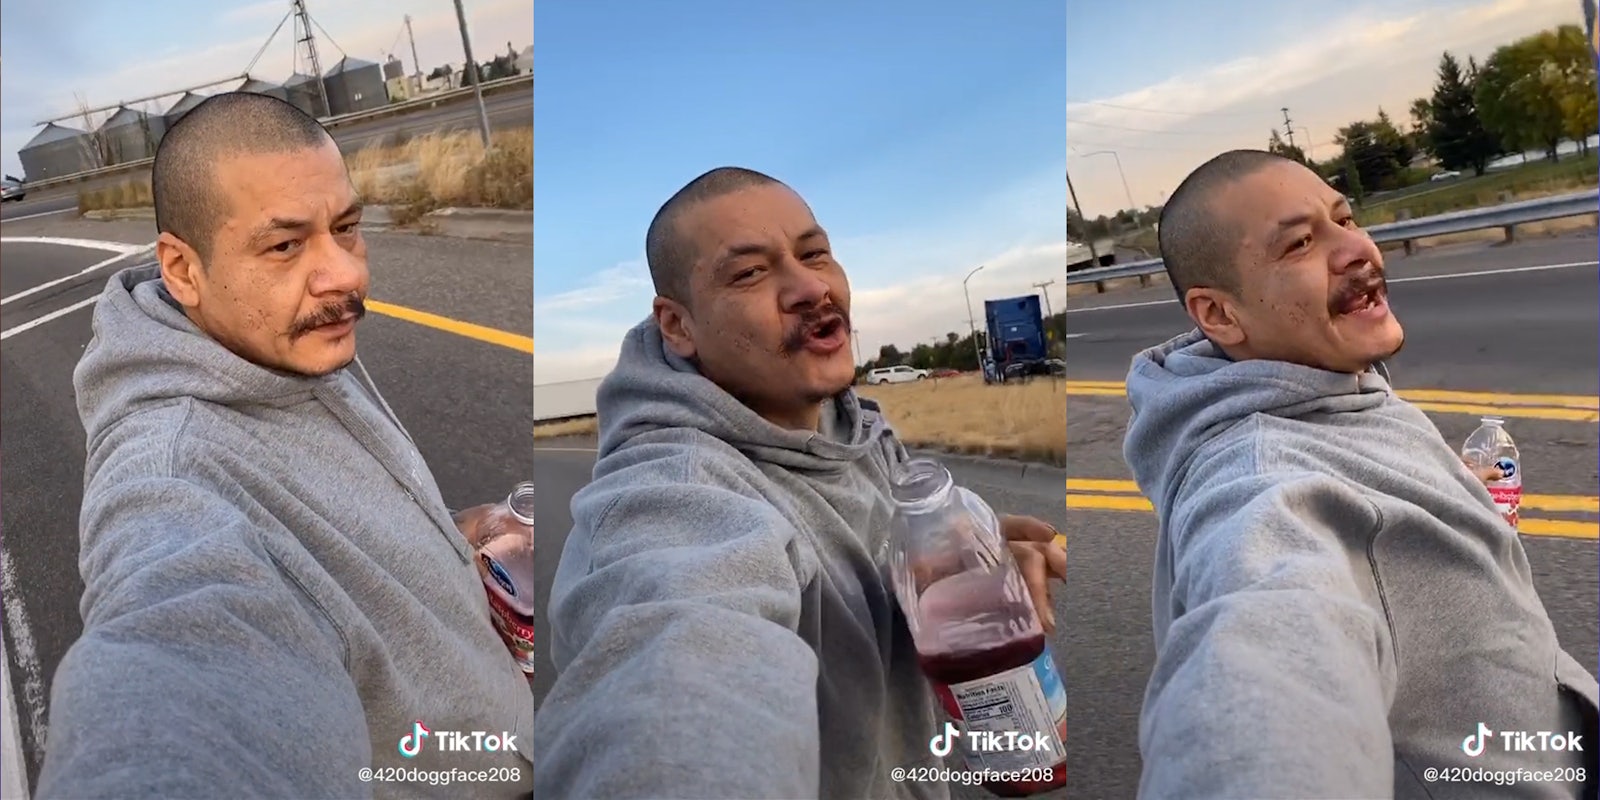 man skateboarding with cranberry juice while singing 'dreams' by fleetwood mac